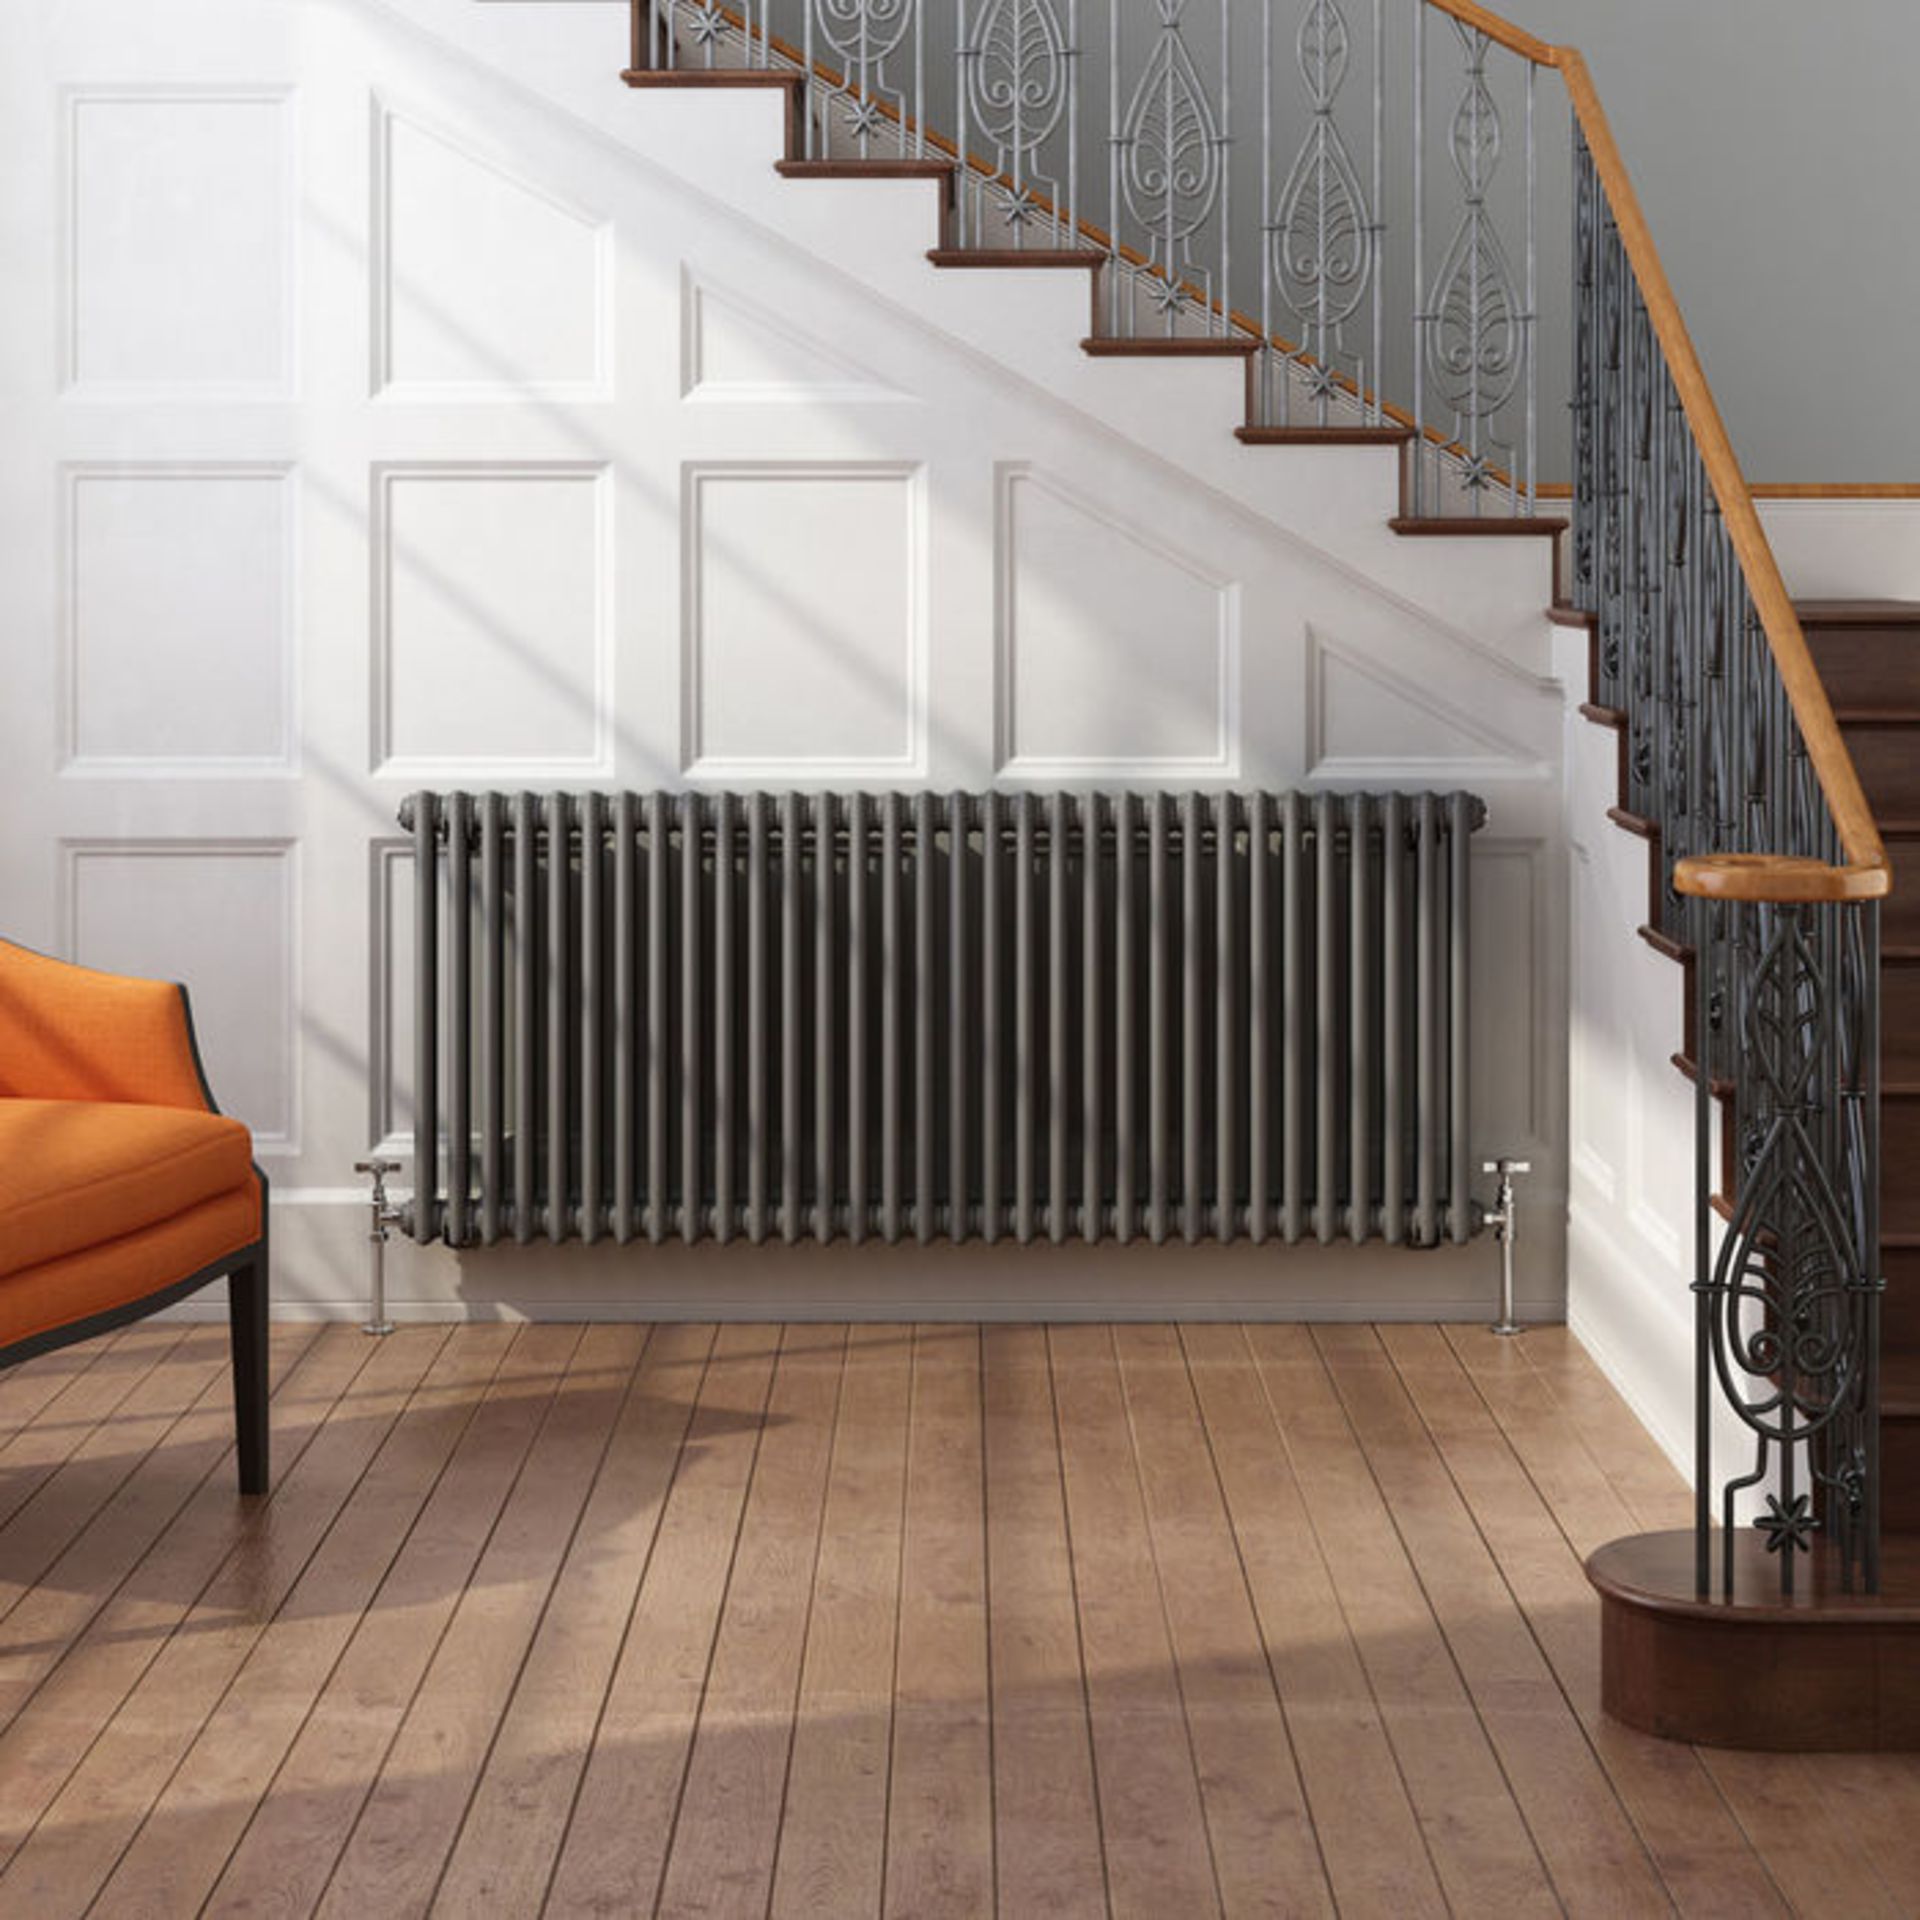 (XM122) 600x1458mm Anthracite Double Panel Horizontal Colosseum Traditional Radiator. RRP £539.99. - Image 2 of 6